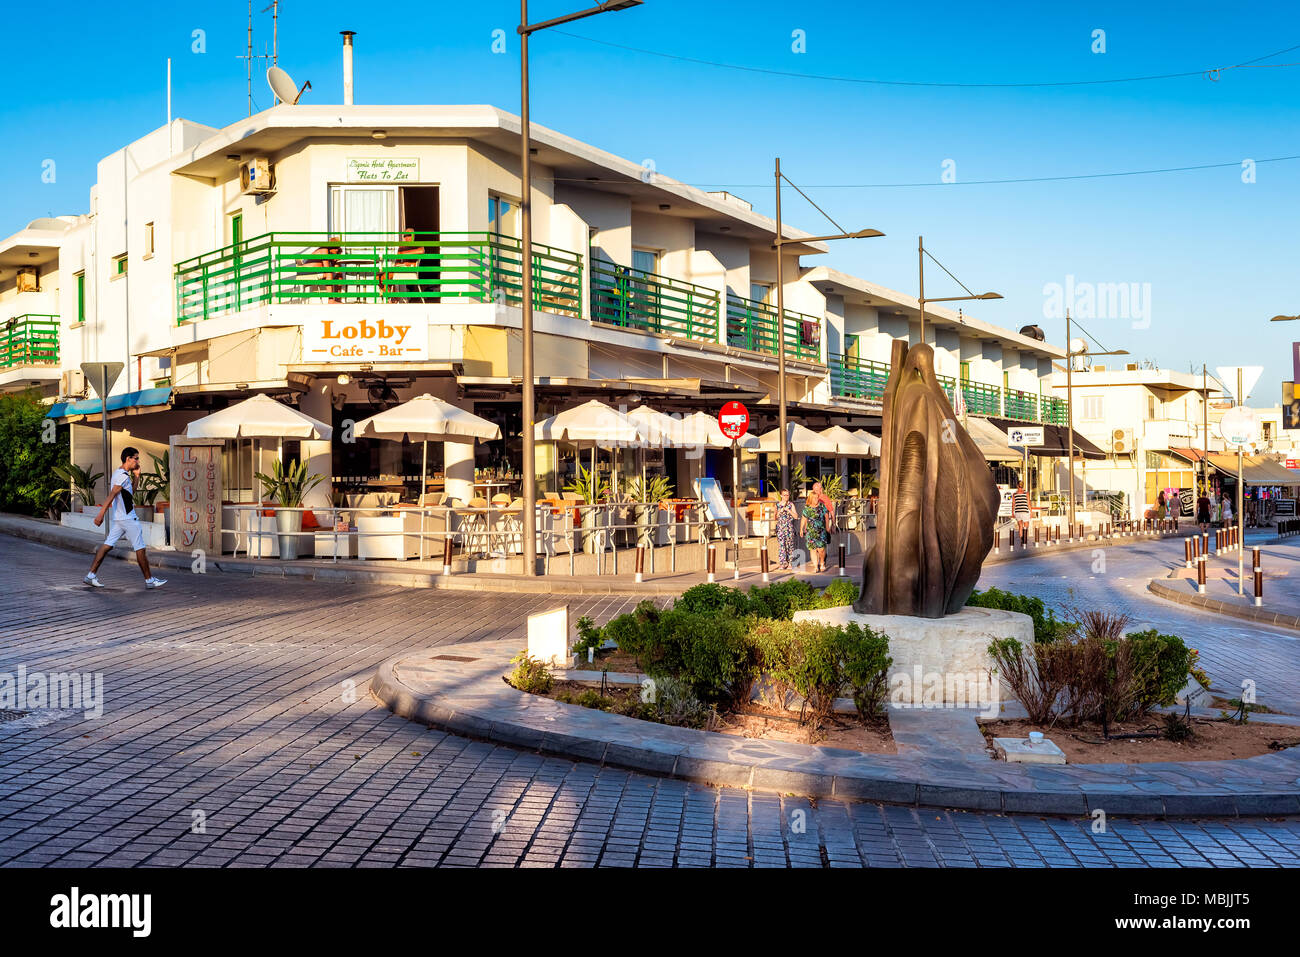 AYIA NAPA, CYPRUS - AUGUST 18, 2016: The Lady Farmer of Ayia Napa statue in the town centre. Stock Photo